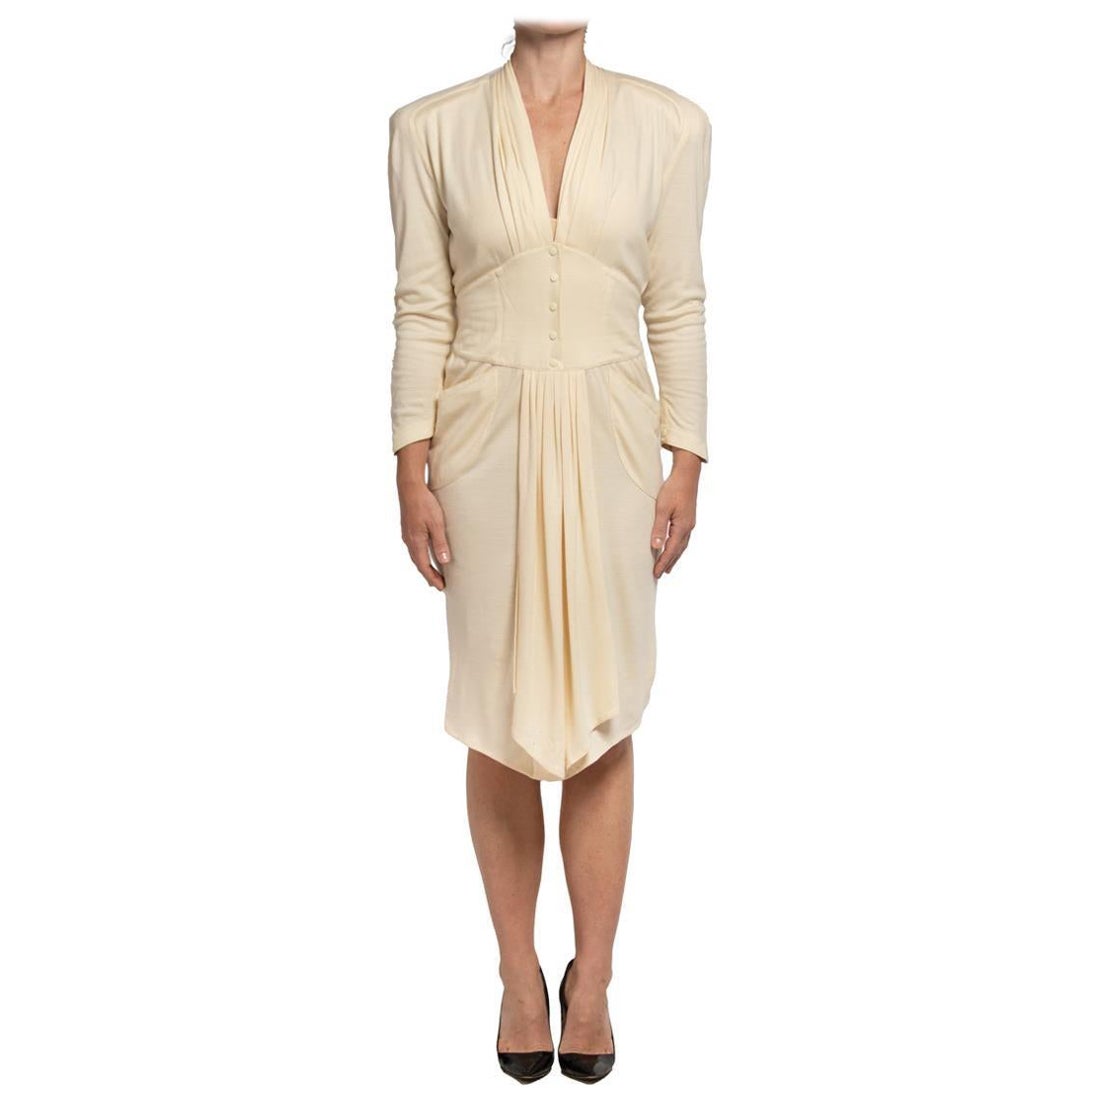 1980S THIERRY MUGLER Cream Wool Blend Jersey Sleeved Dress With Pockets For Sale